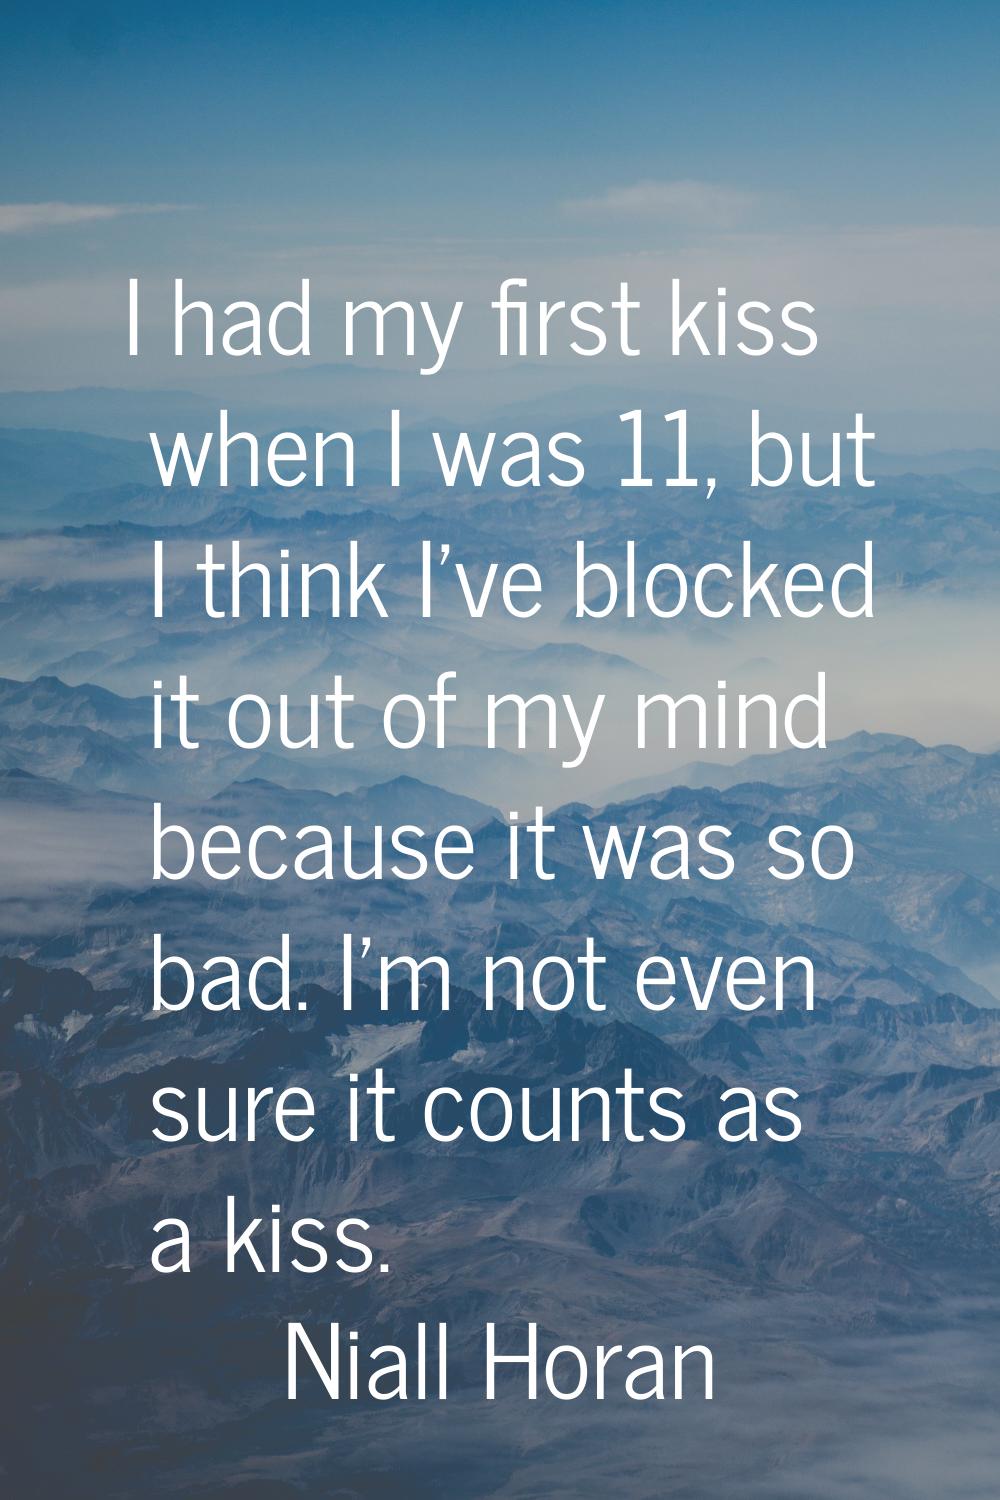 I had my first kiss when I was 11, but I think I've blocked it out of my mind because it was so bad